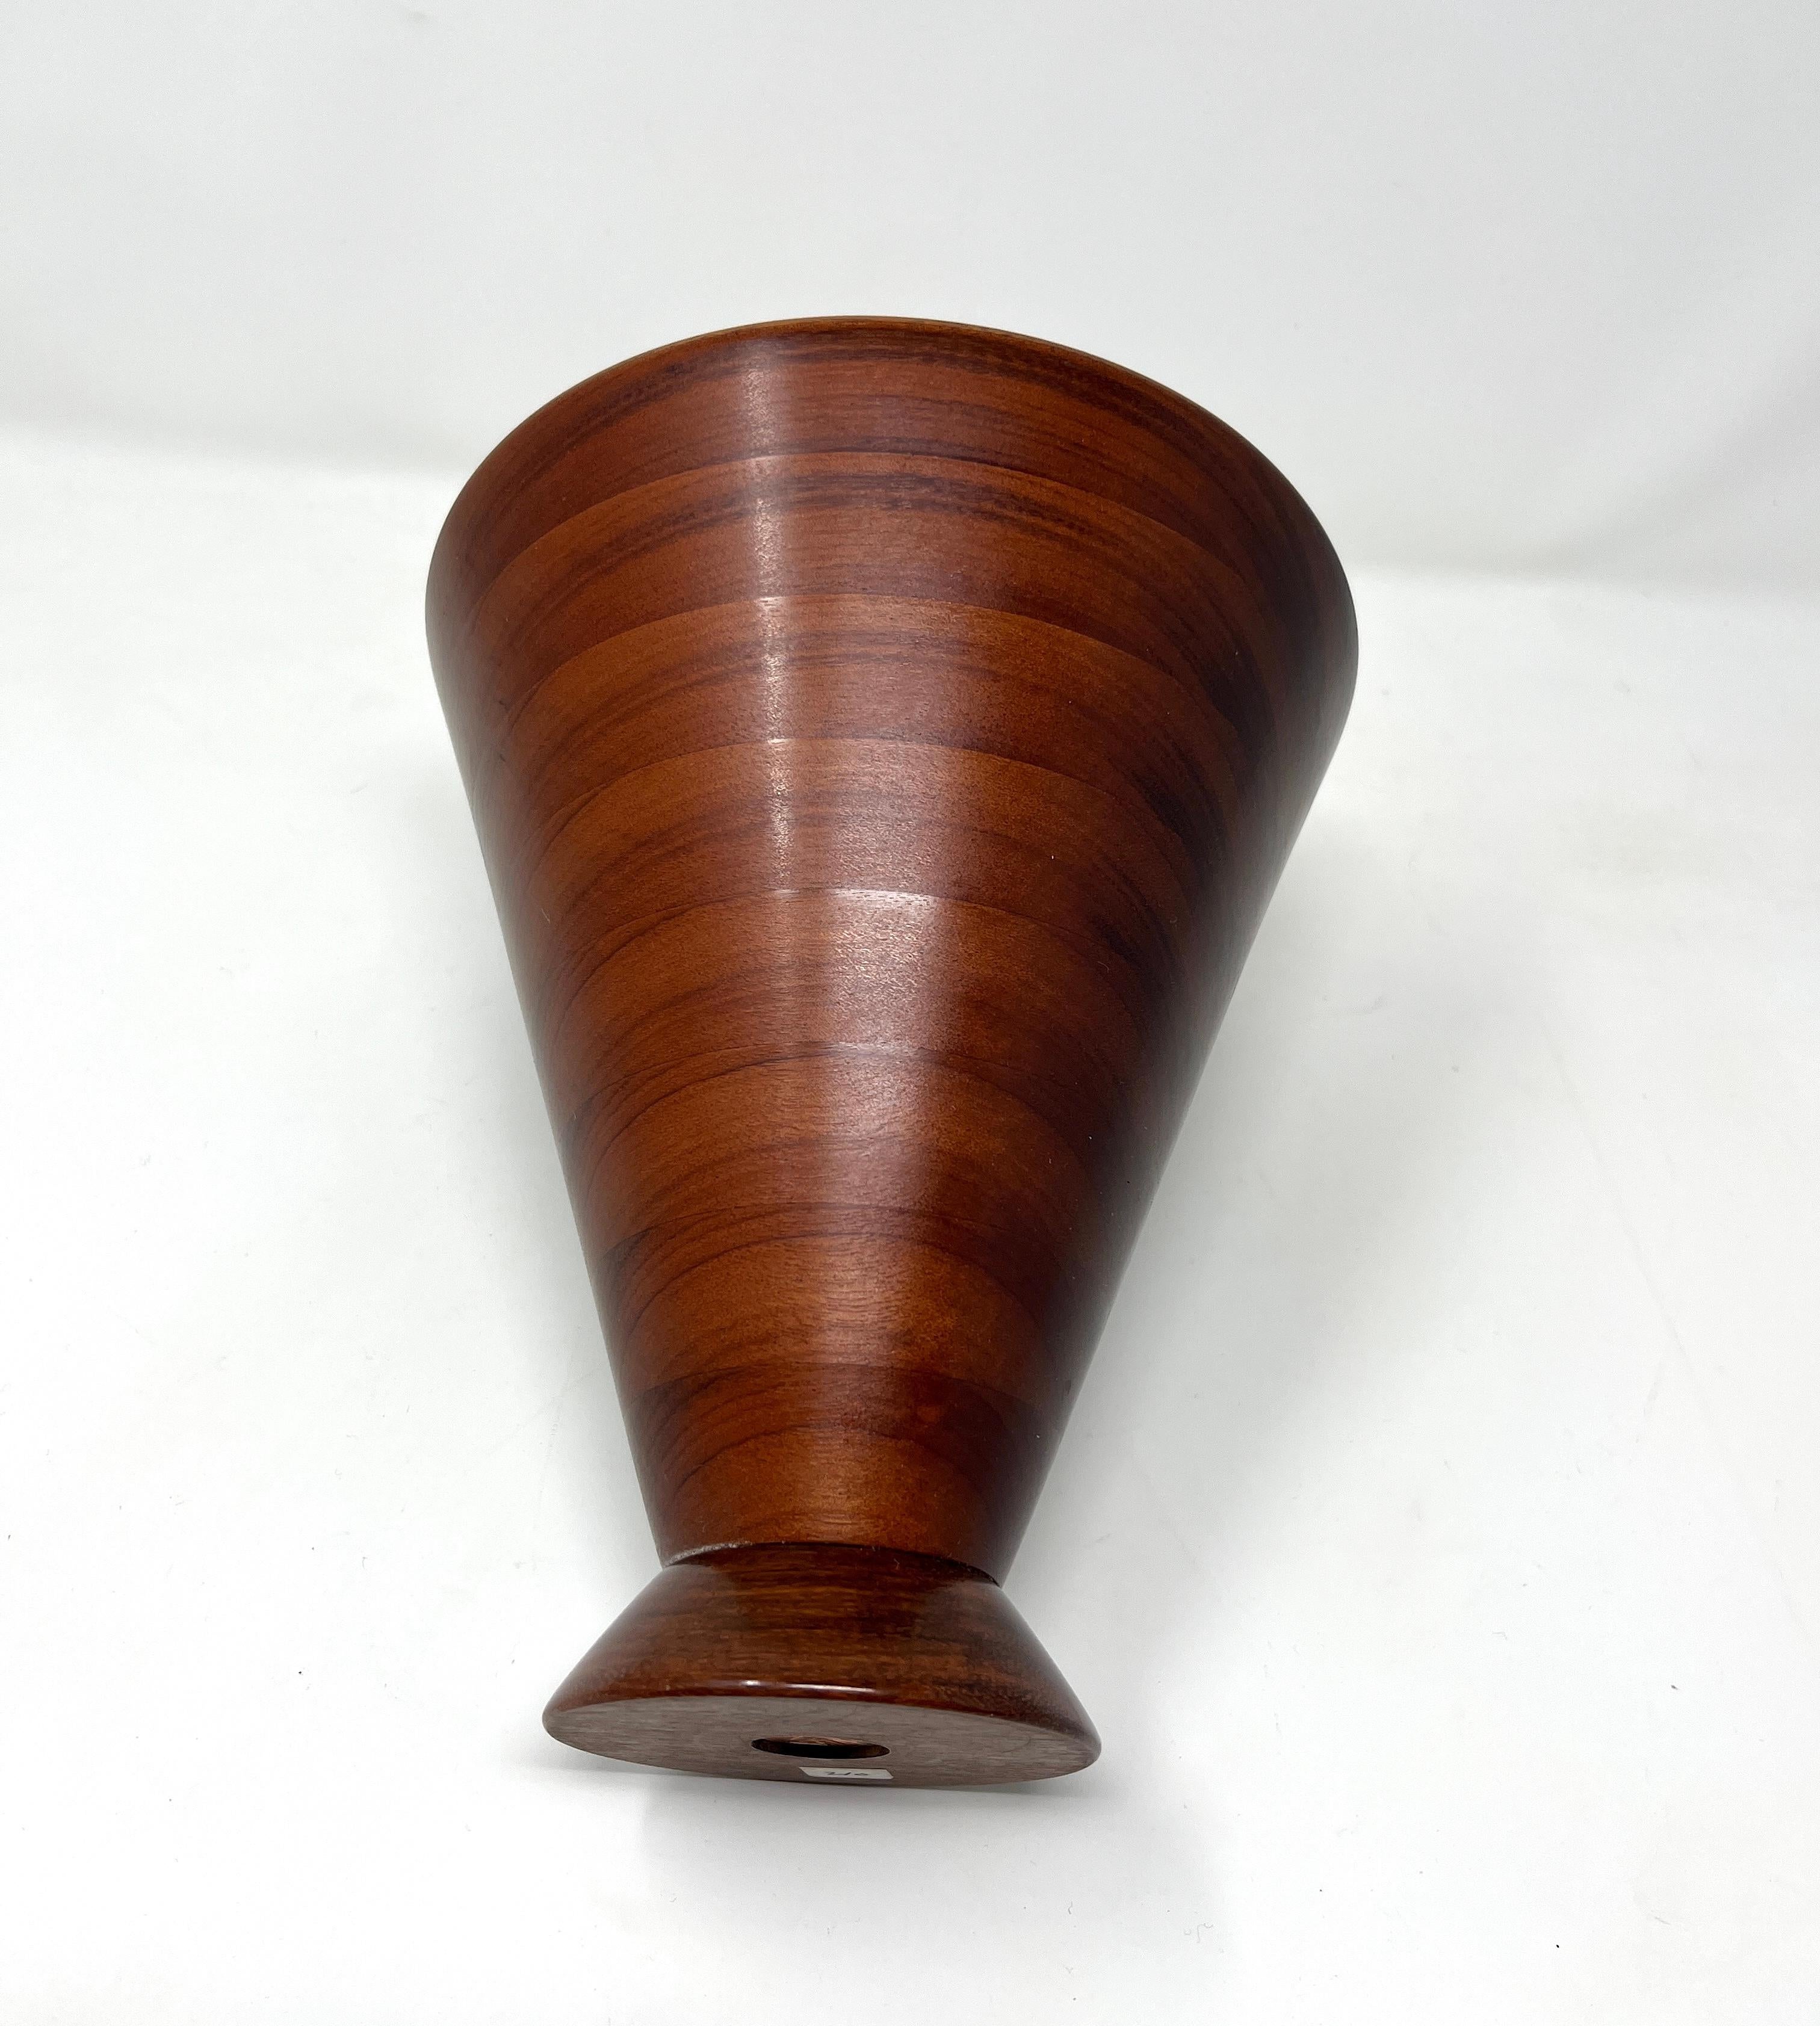 Hand-Carved Handcrafted Turned Wood Sculptural Vase By Lloyd Cheney, 2002 For Sale